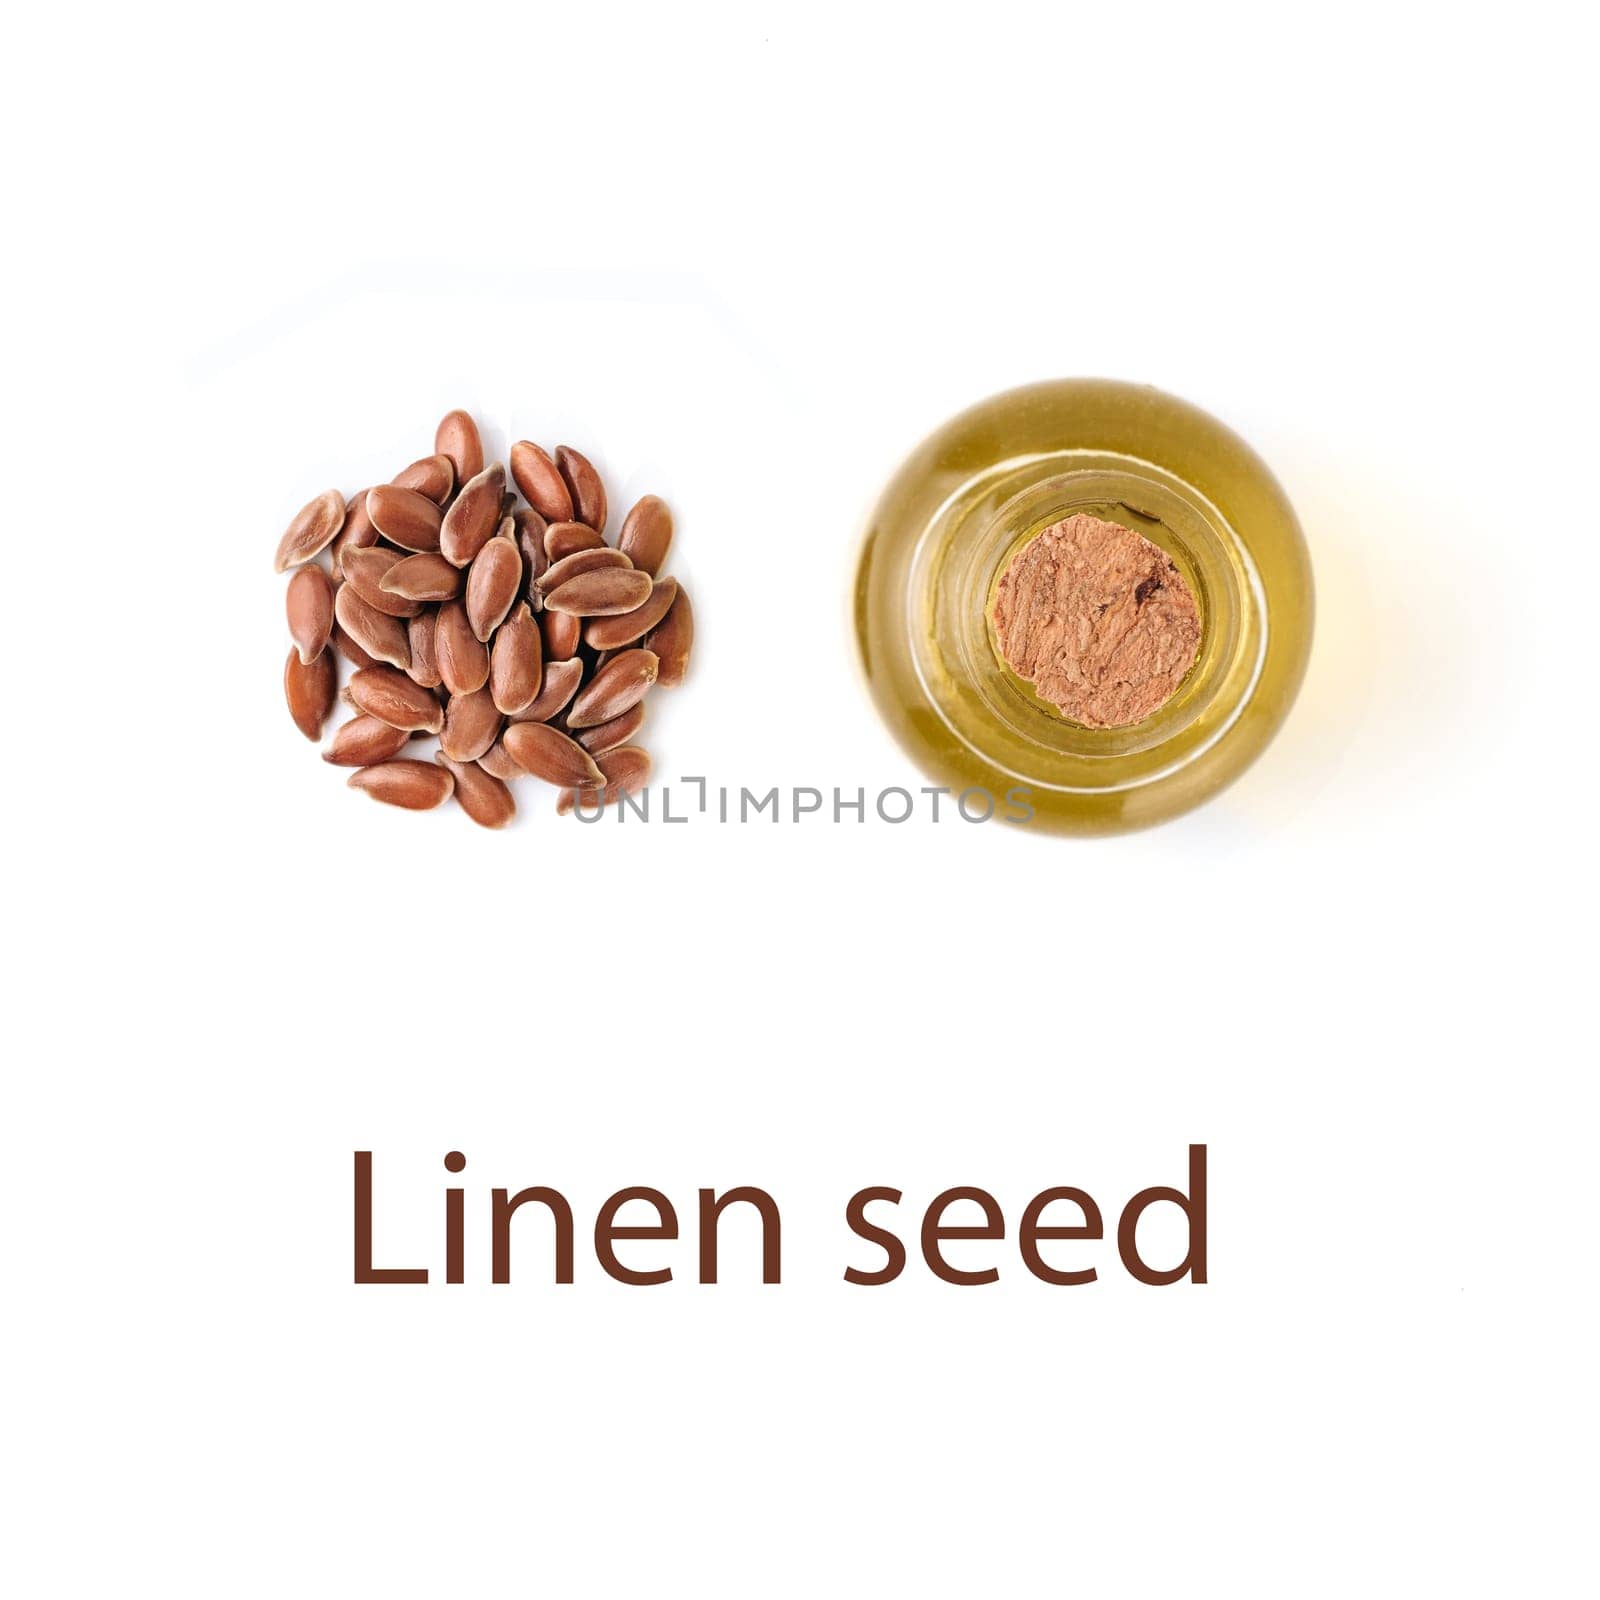 Linen seeds and linen raw oil isolated, top view by fascinadora